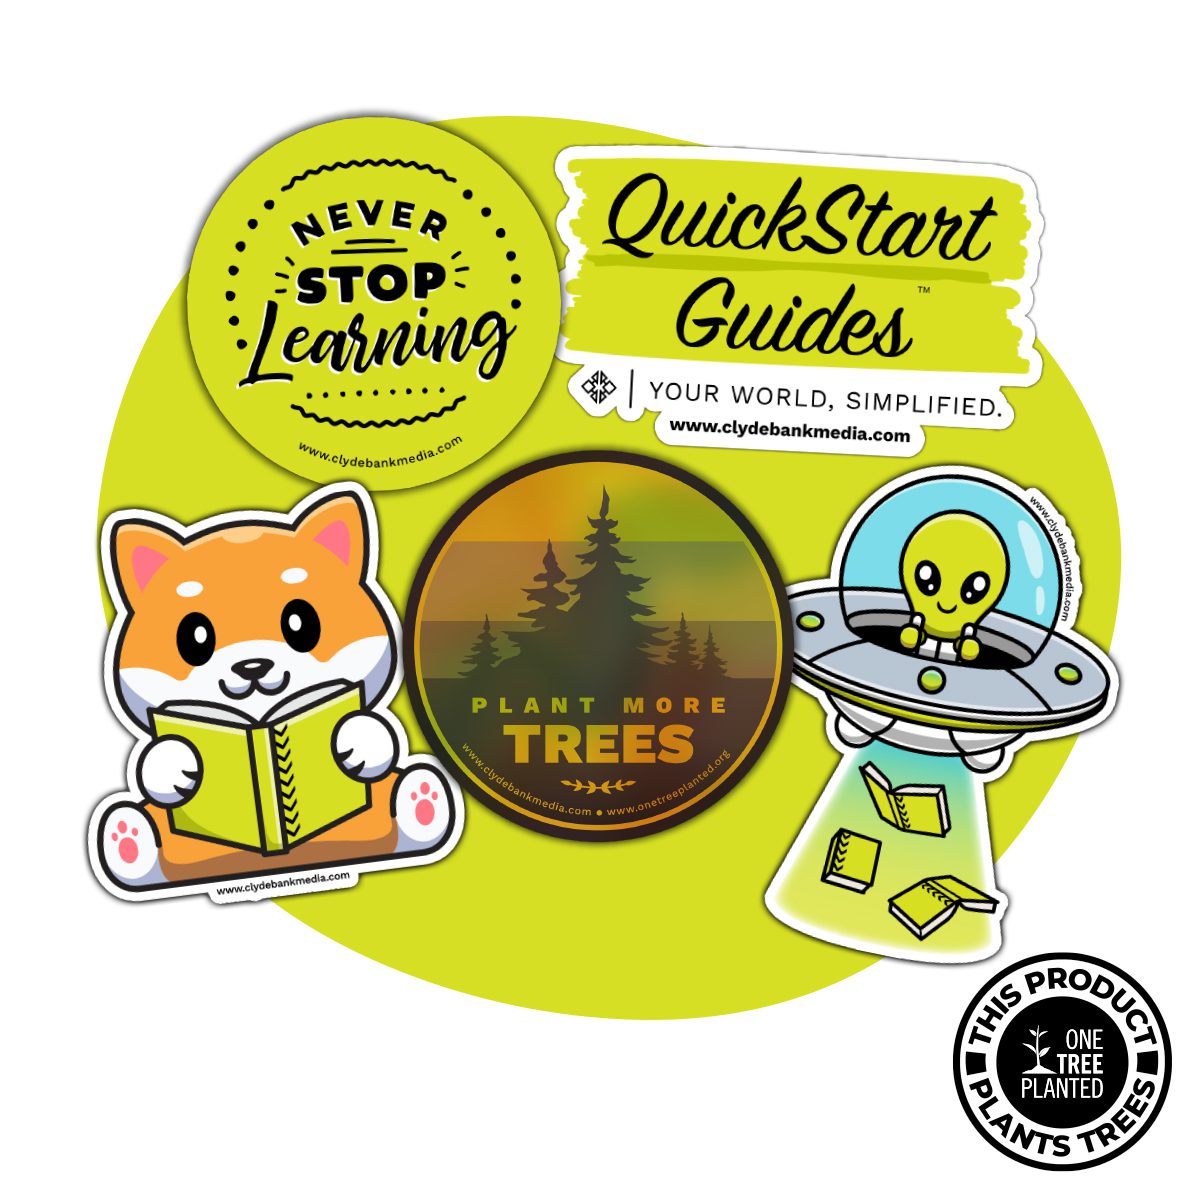 The Series 1 Limited Edition One For One Tree Planting Sticker Pack